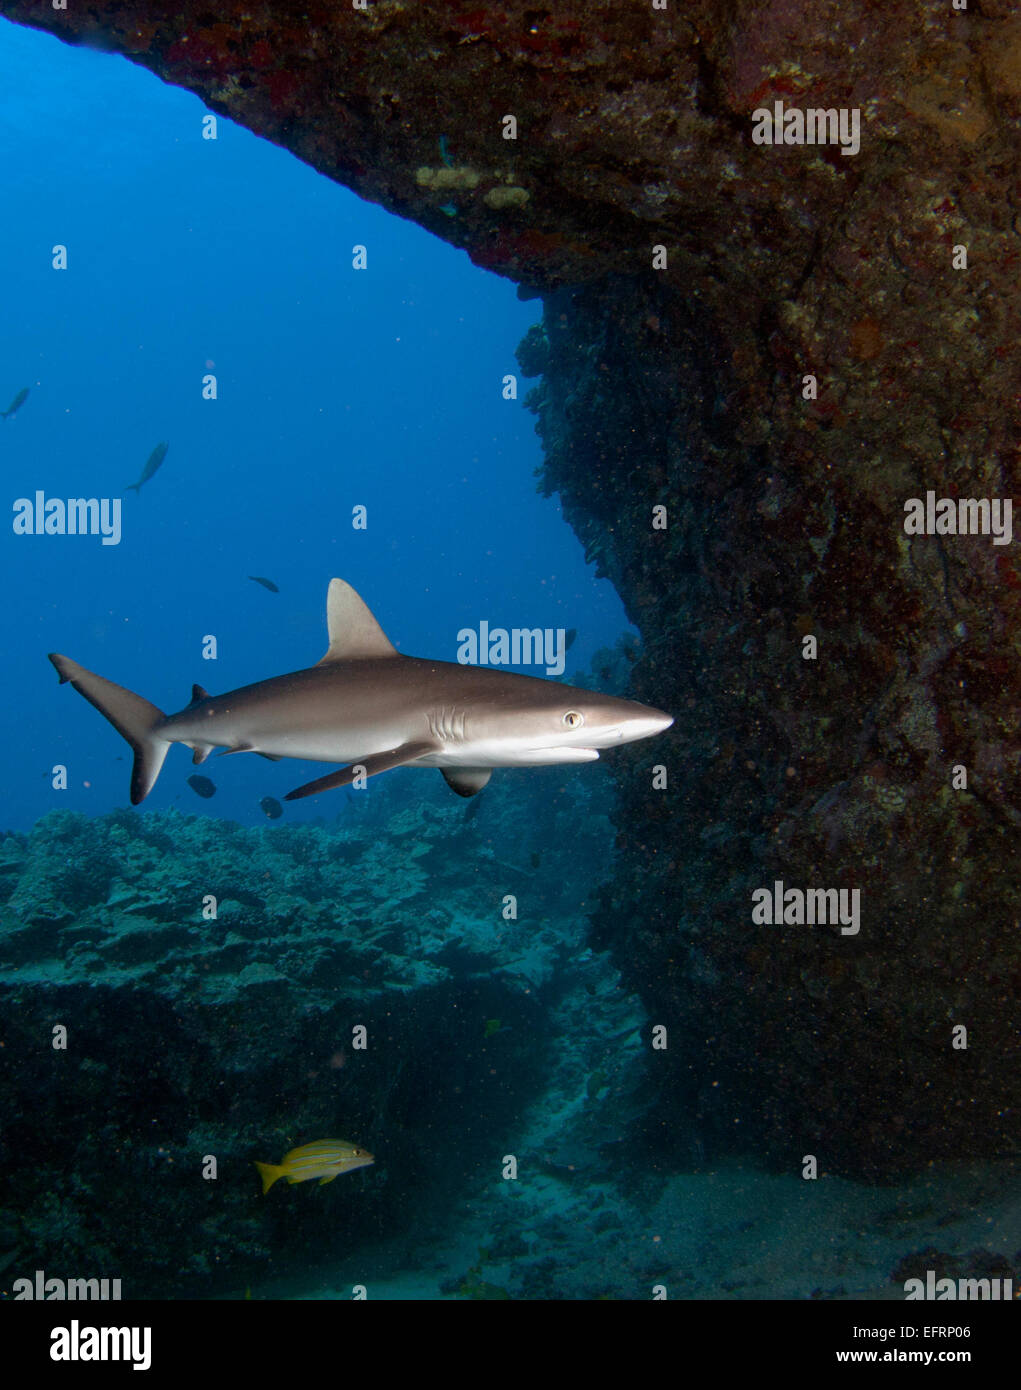 A gray reef shark (Carcharhinus amblyrhyncos) cruises by for an investigation Stock Photo